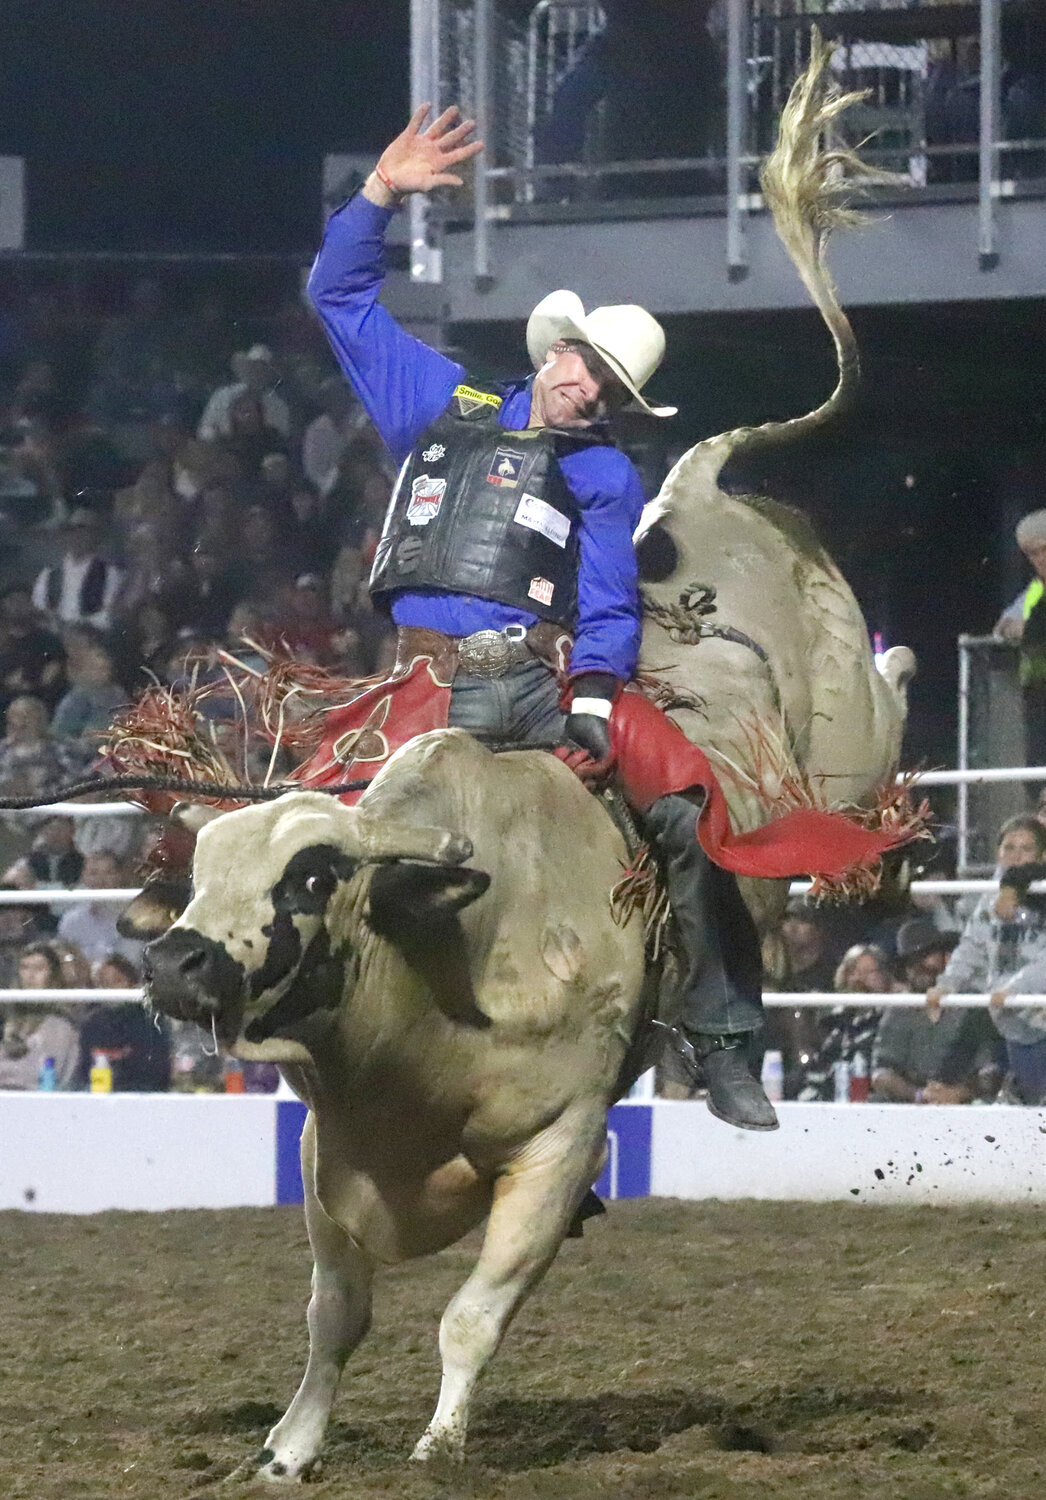 Leroy Miller of Moravia, Iow,a hangs on for a ride in the saddlebronc event Wednesday night as the 75th Anniversary of the Tri-State Rodeo kicked off with the Jim Baier/Dodge Ram Chute-Out.